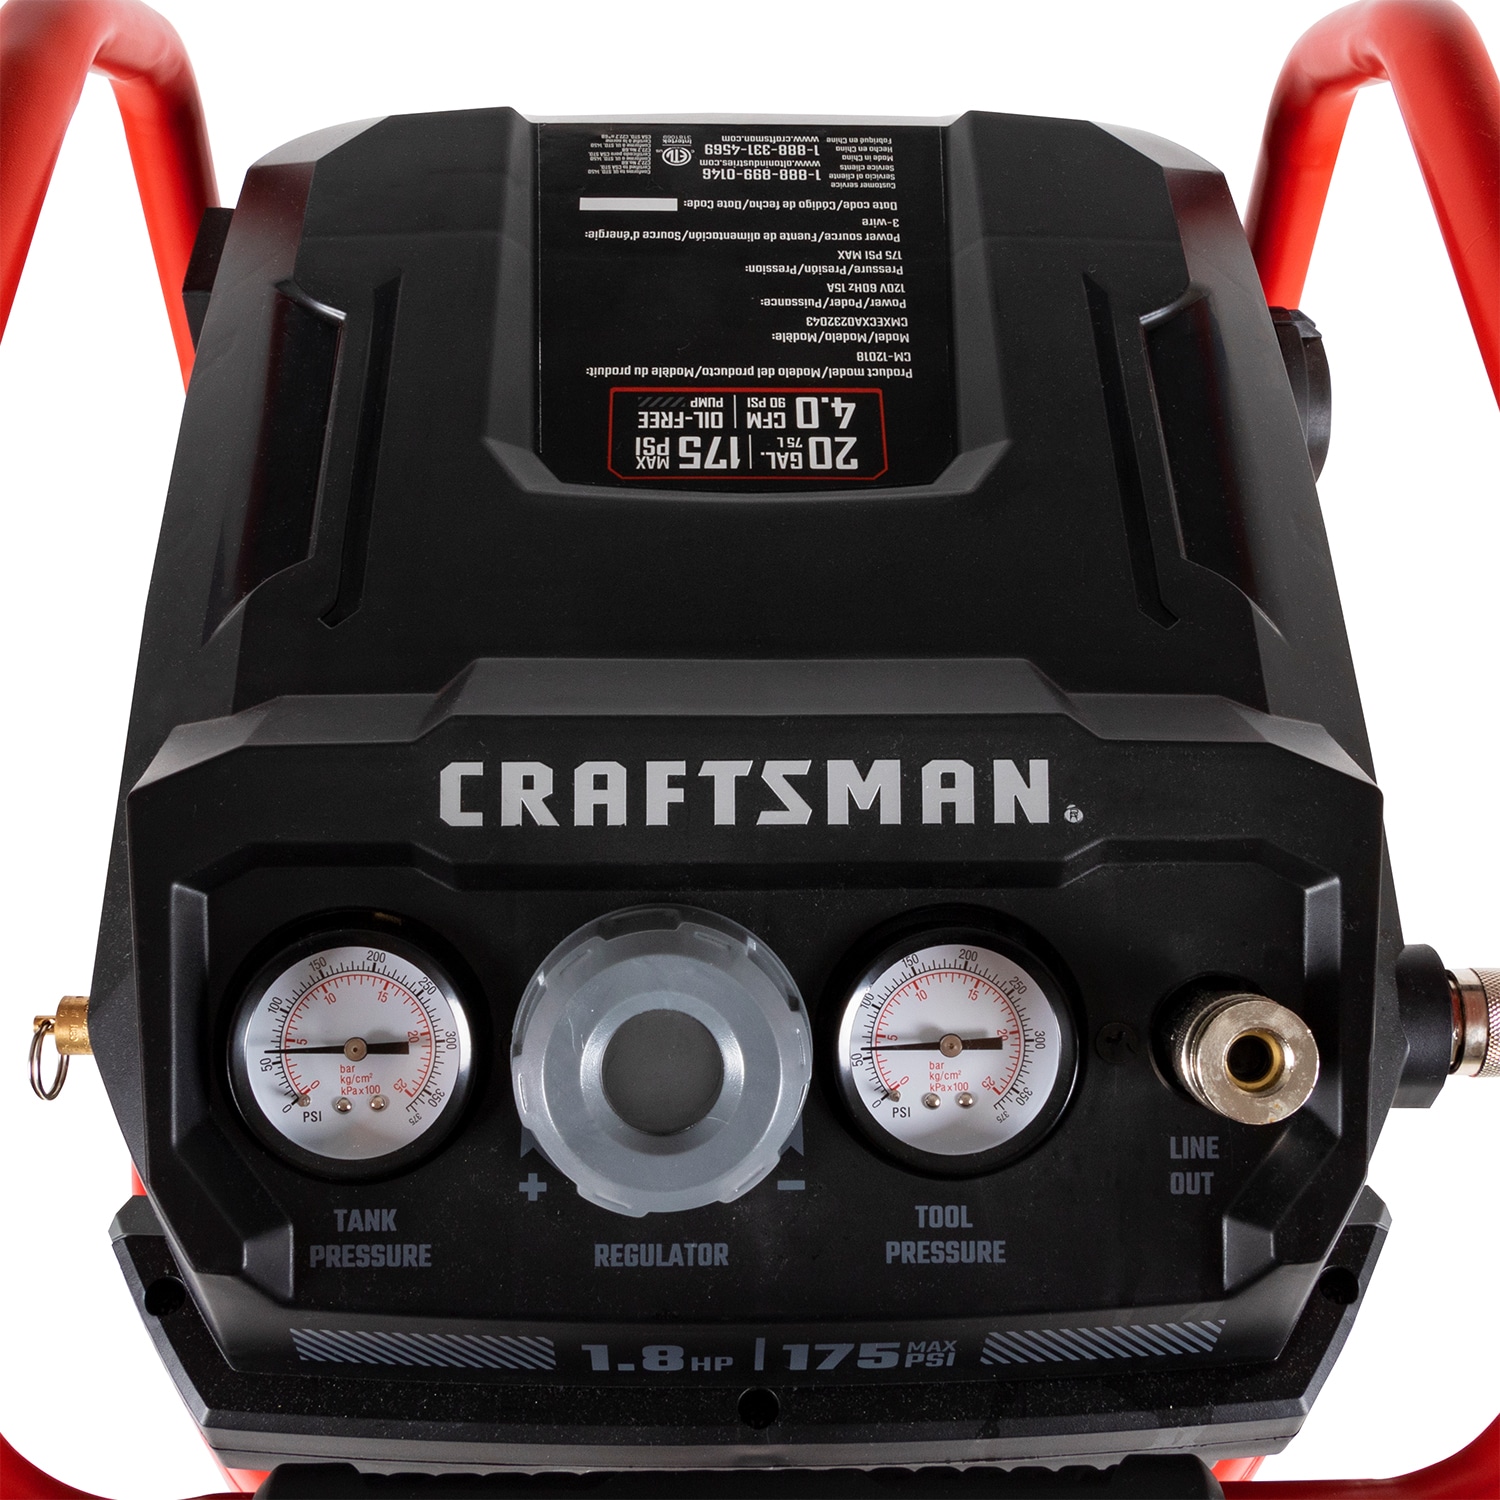 CRAFTSMAN 60-Gallons 175 PSI Vertical Air Compressor with